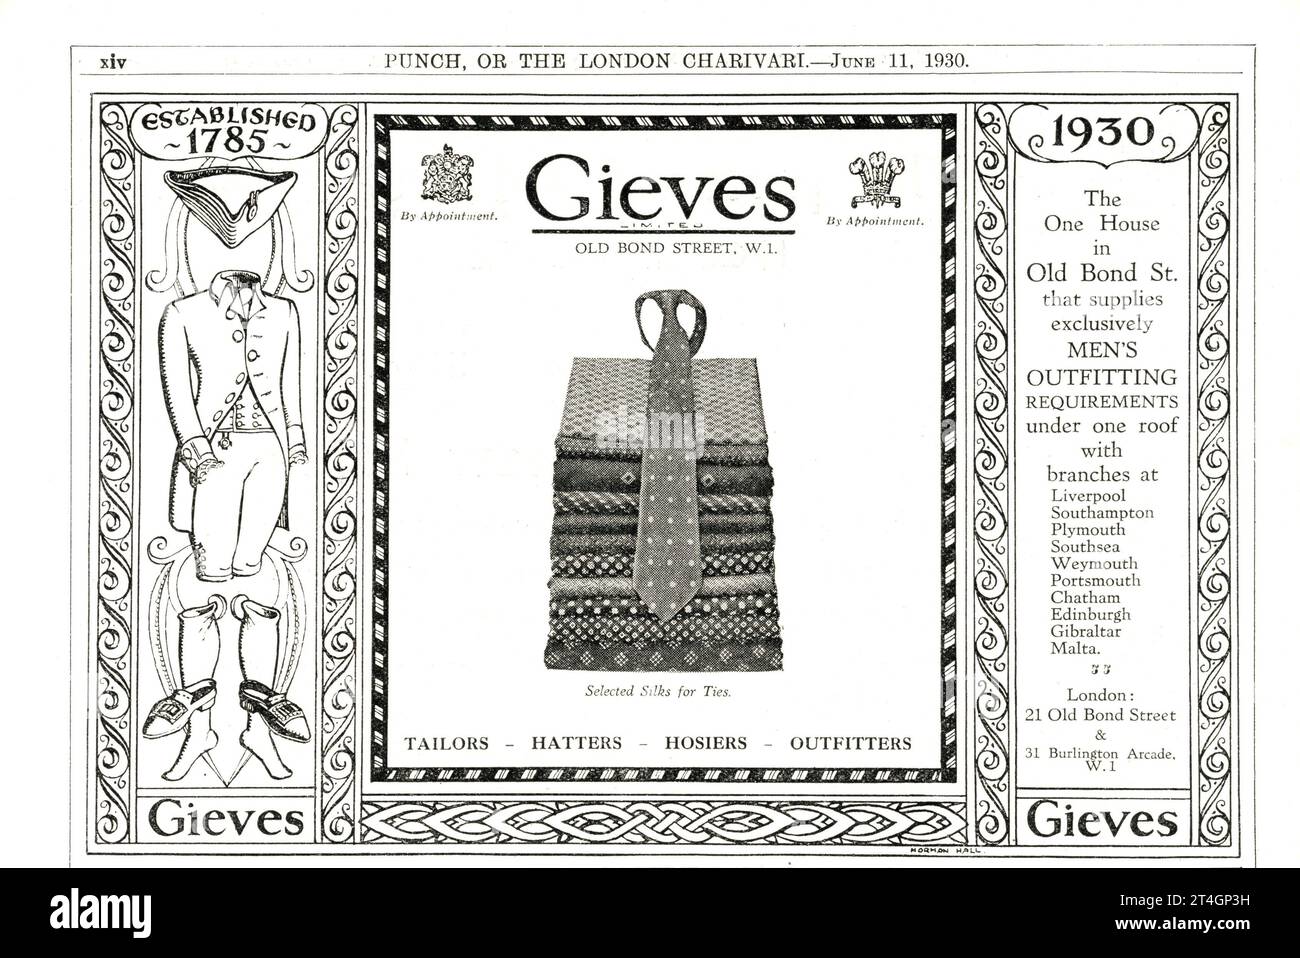 GIEVES Men's Outfitters Old Bond Street, London W1 Tailors Hatters Hosiers and Outfitters gründeten 1785 1930 die Werbung des British Magazine Stockfoto